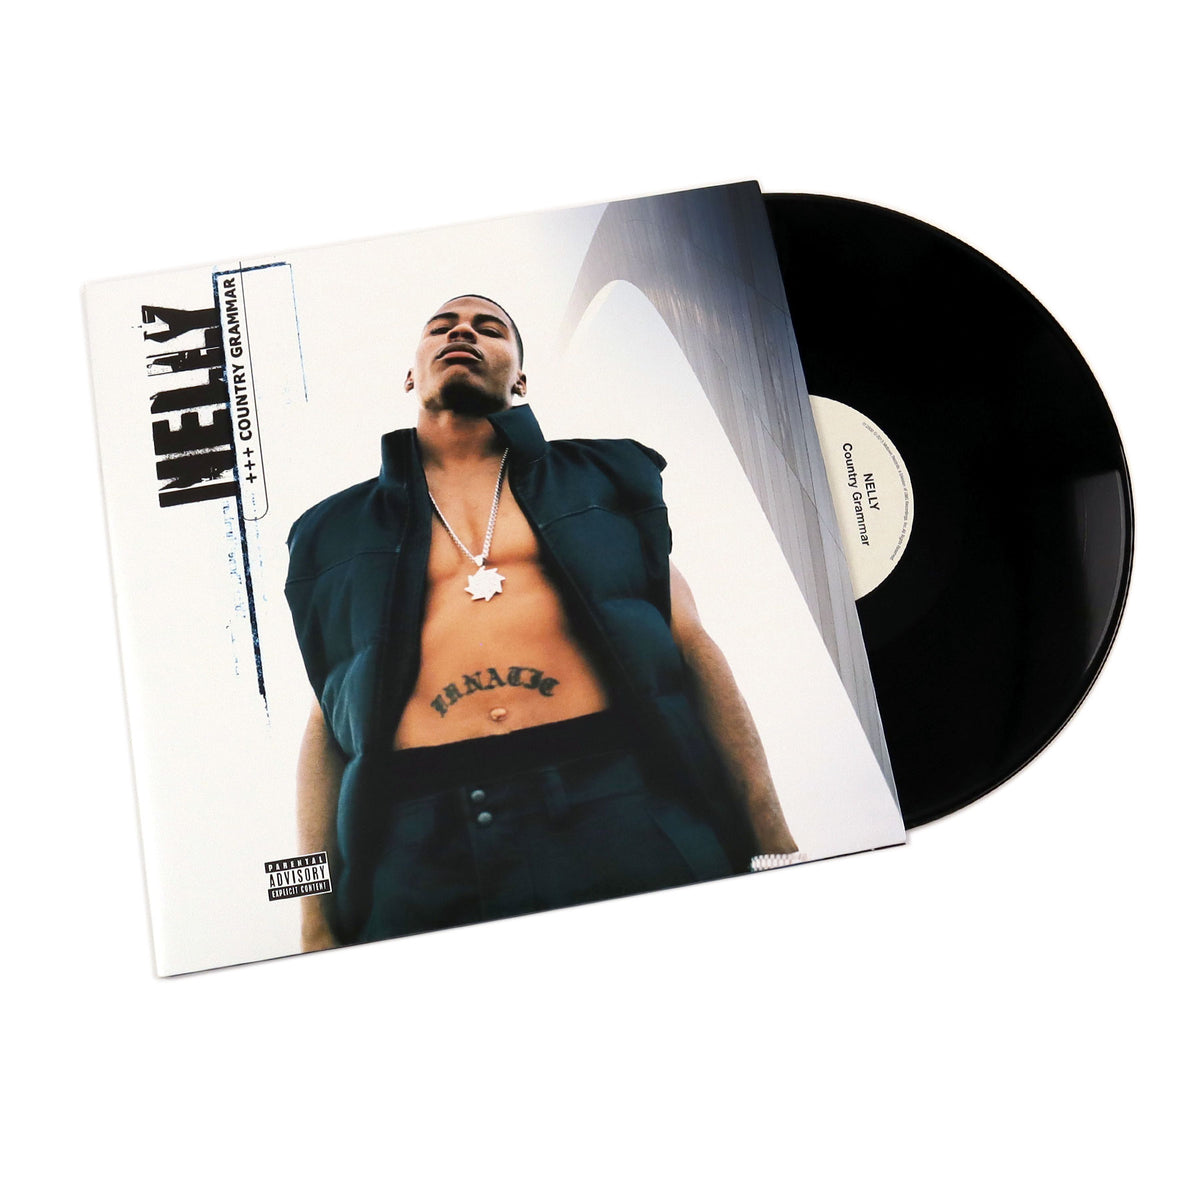 nelly country grammar cd cover 4x6